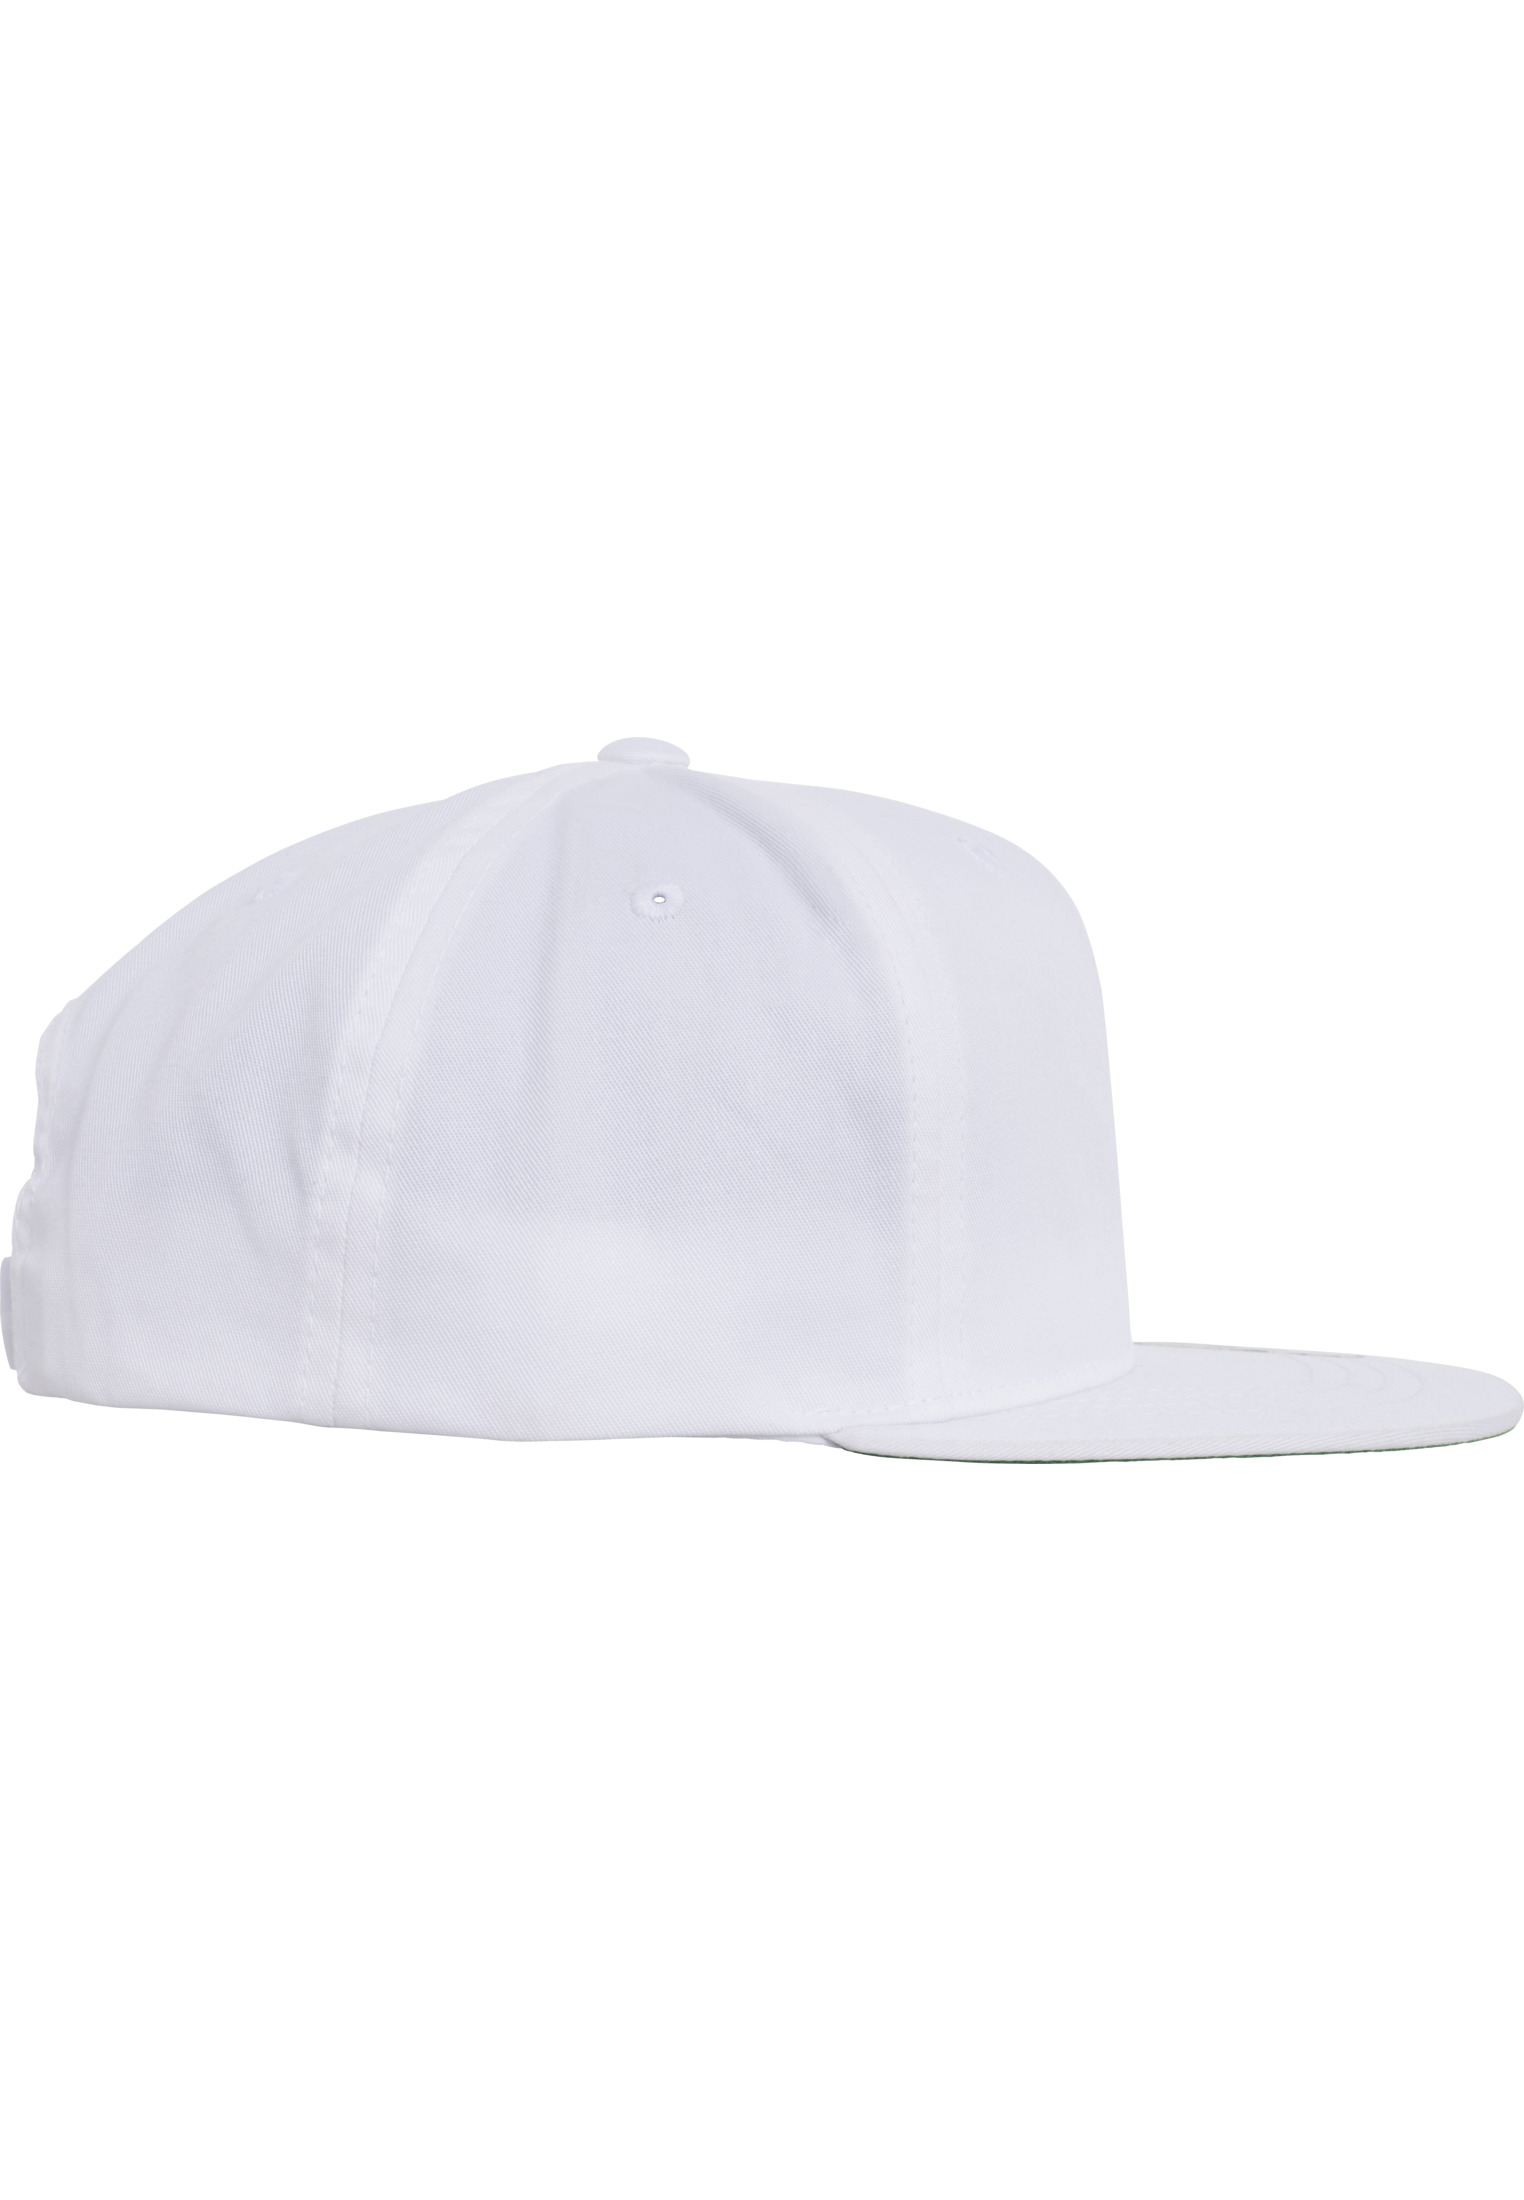 Kids Pro-Style Twill Snapback Youth Cap in Farbe white